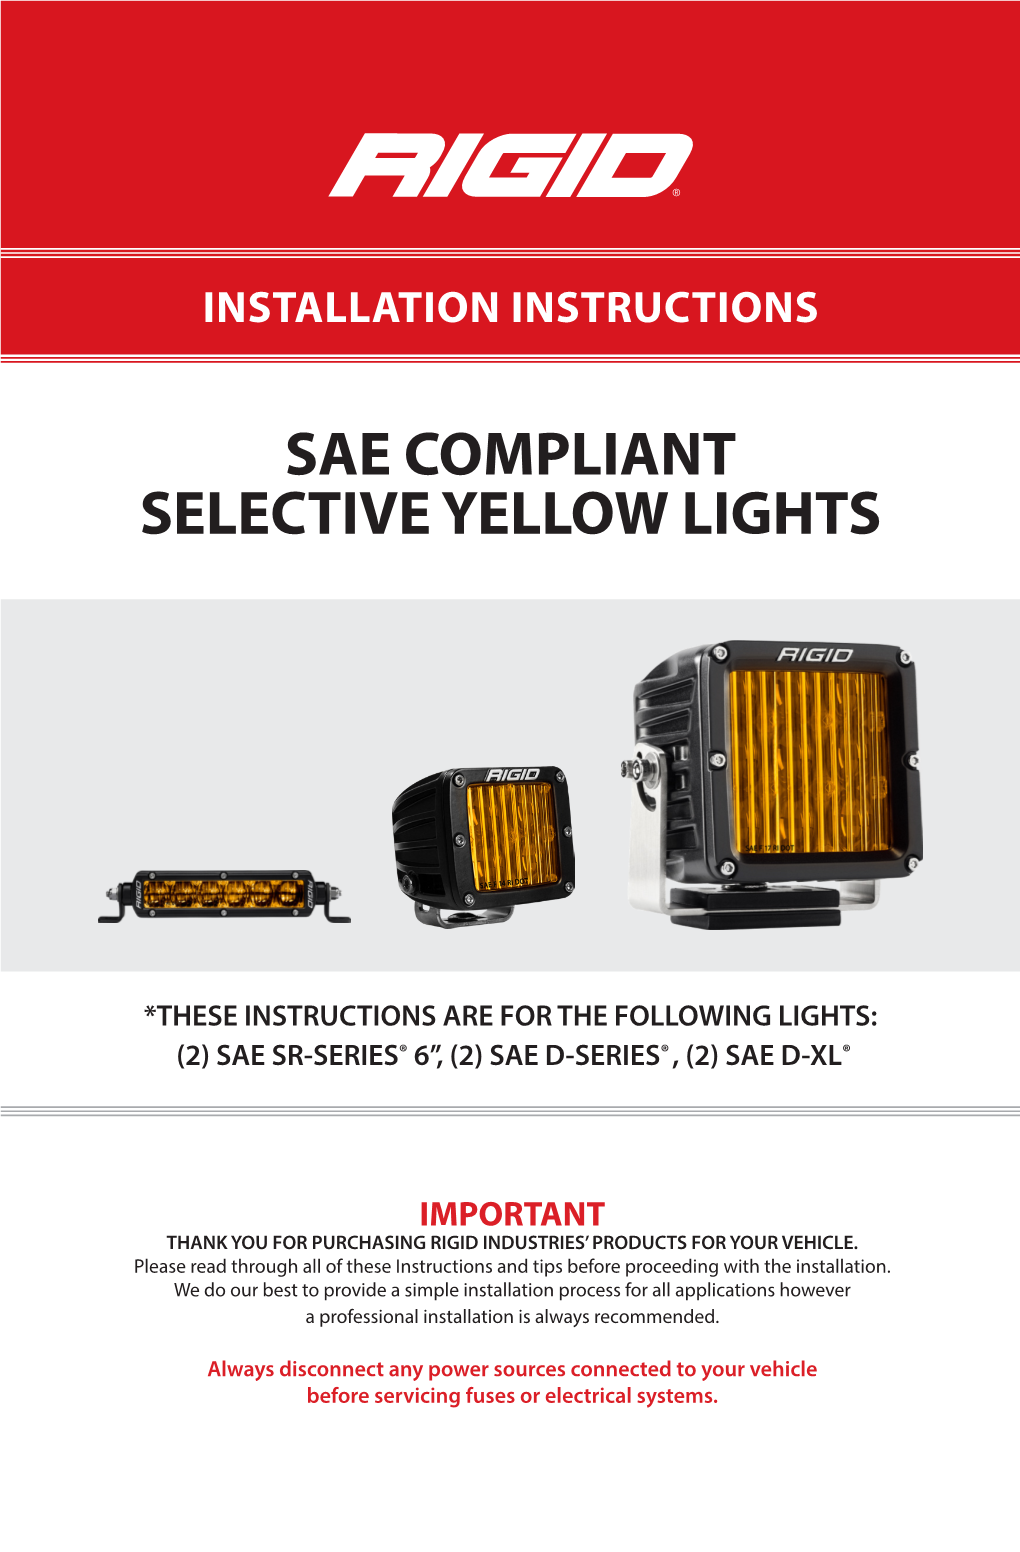 Sae Compliant Selective Yellow Lights Installation Instructions